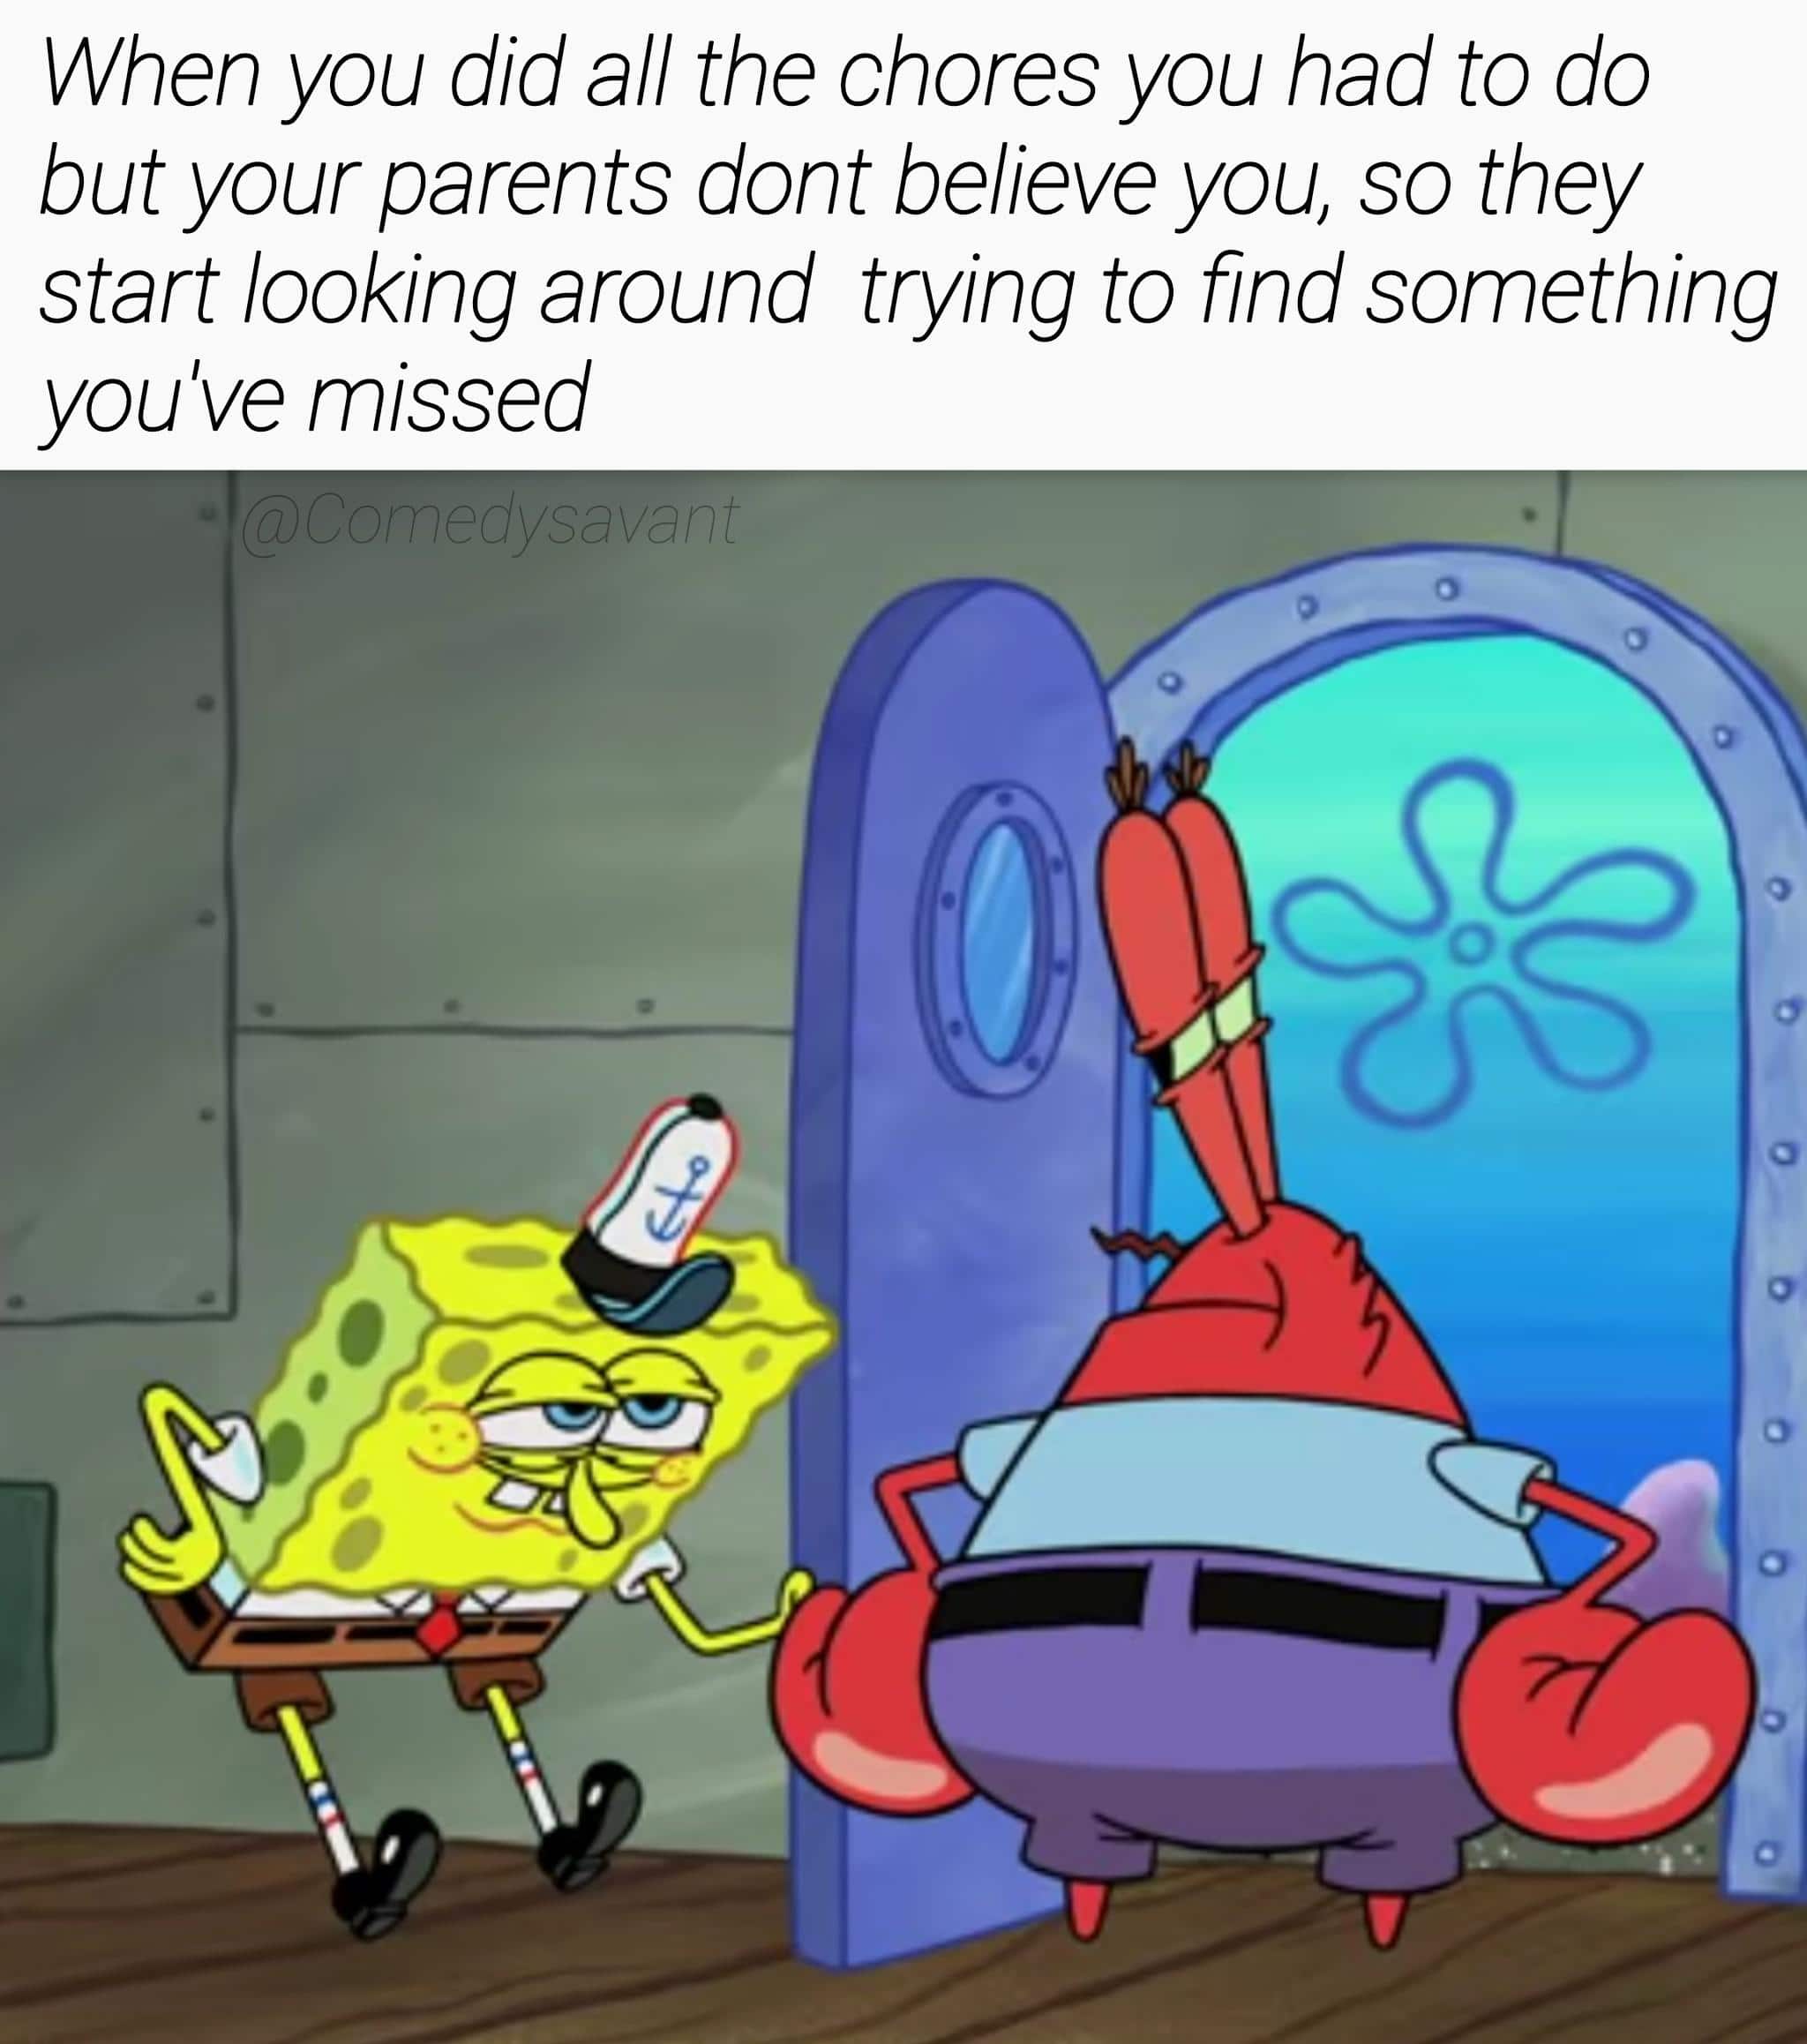 Spongebob,  Spongebob Memes Spongebob,  text: When you did al/ the chores you had to do but your parents dont believe you, so they start looking around trying to find something you've missed 